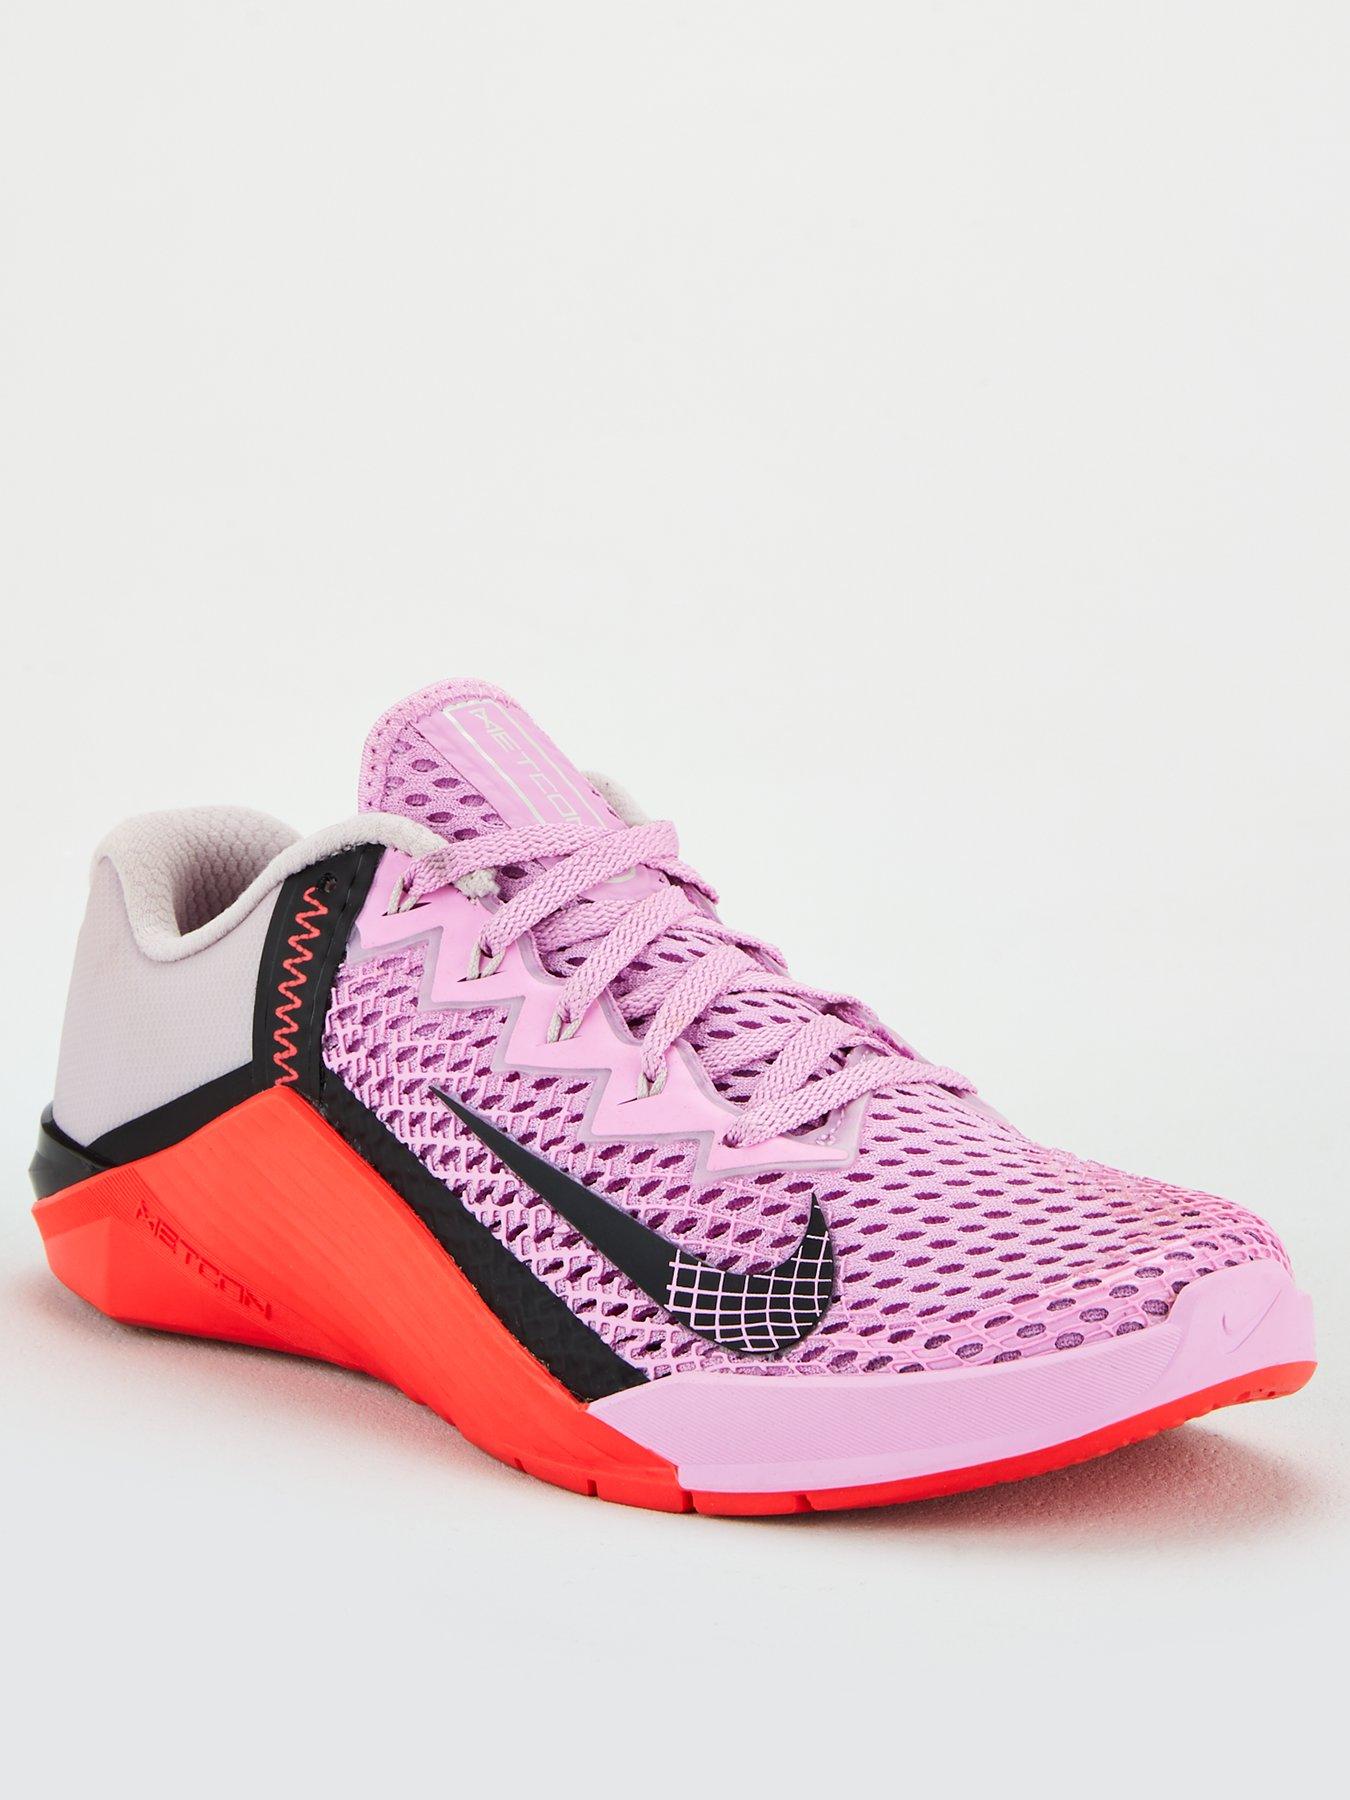 metcon pink